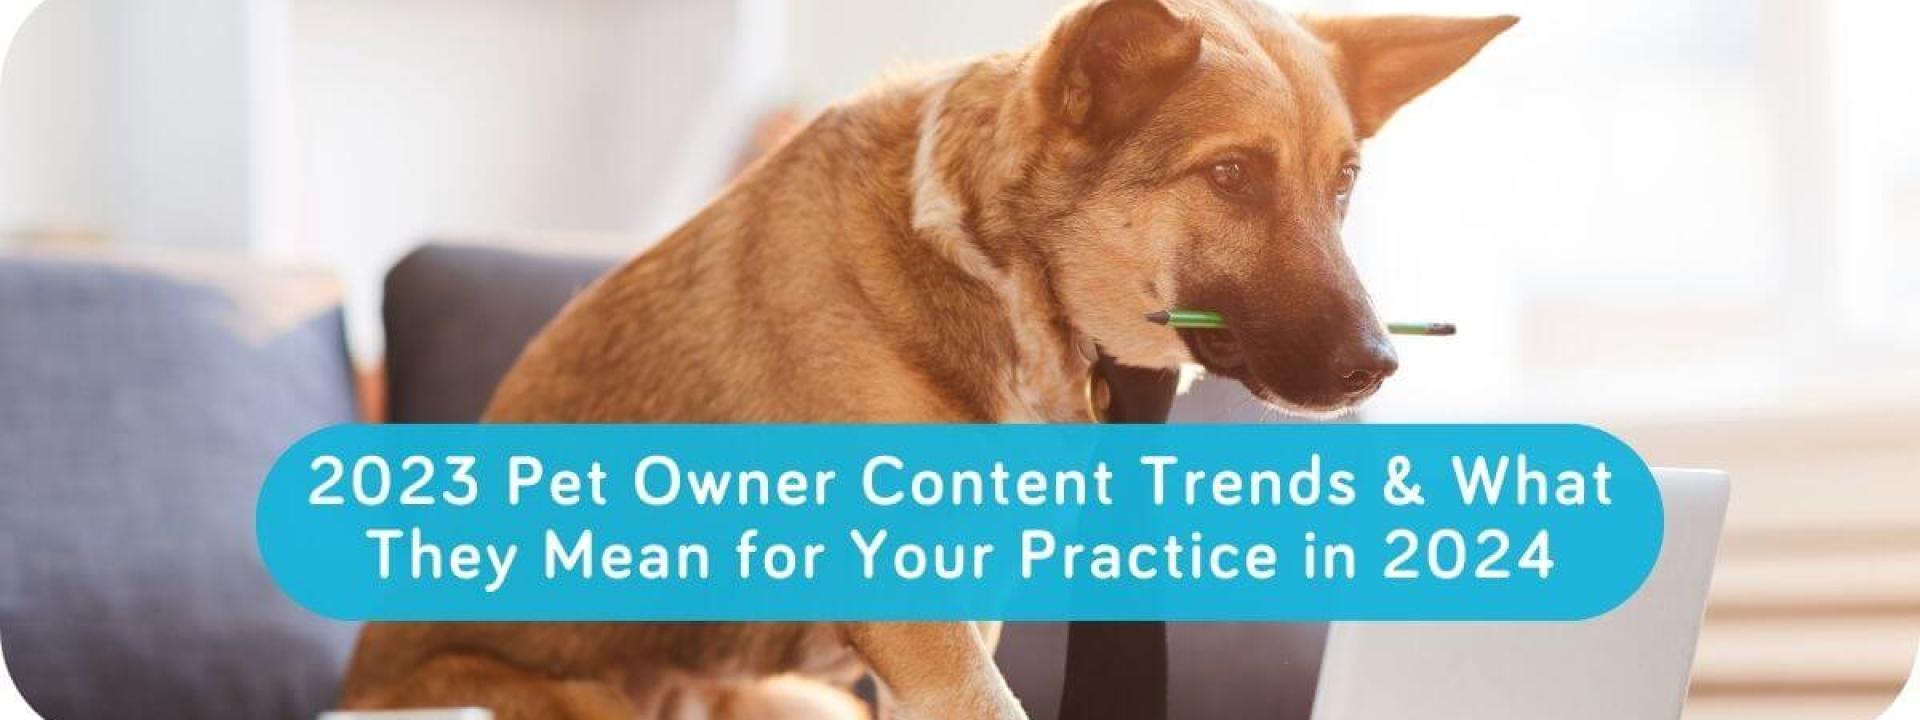 2023 Pet Owner Content Trends & What They Mean for Your Practice in 2024